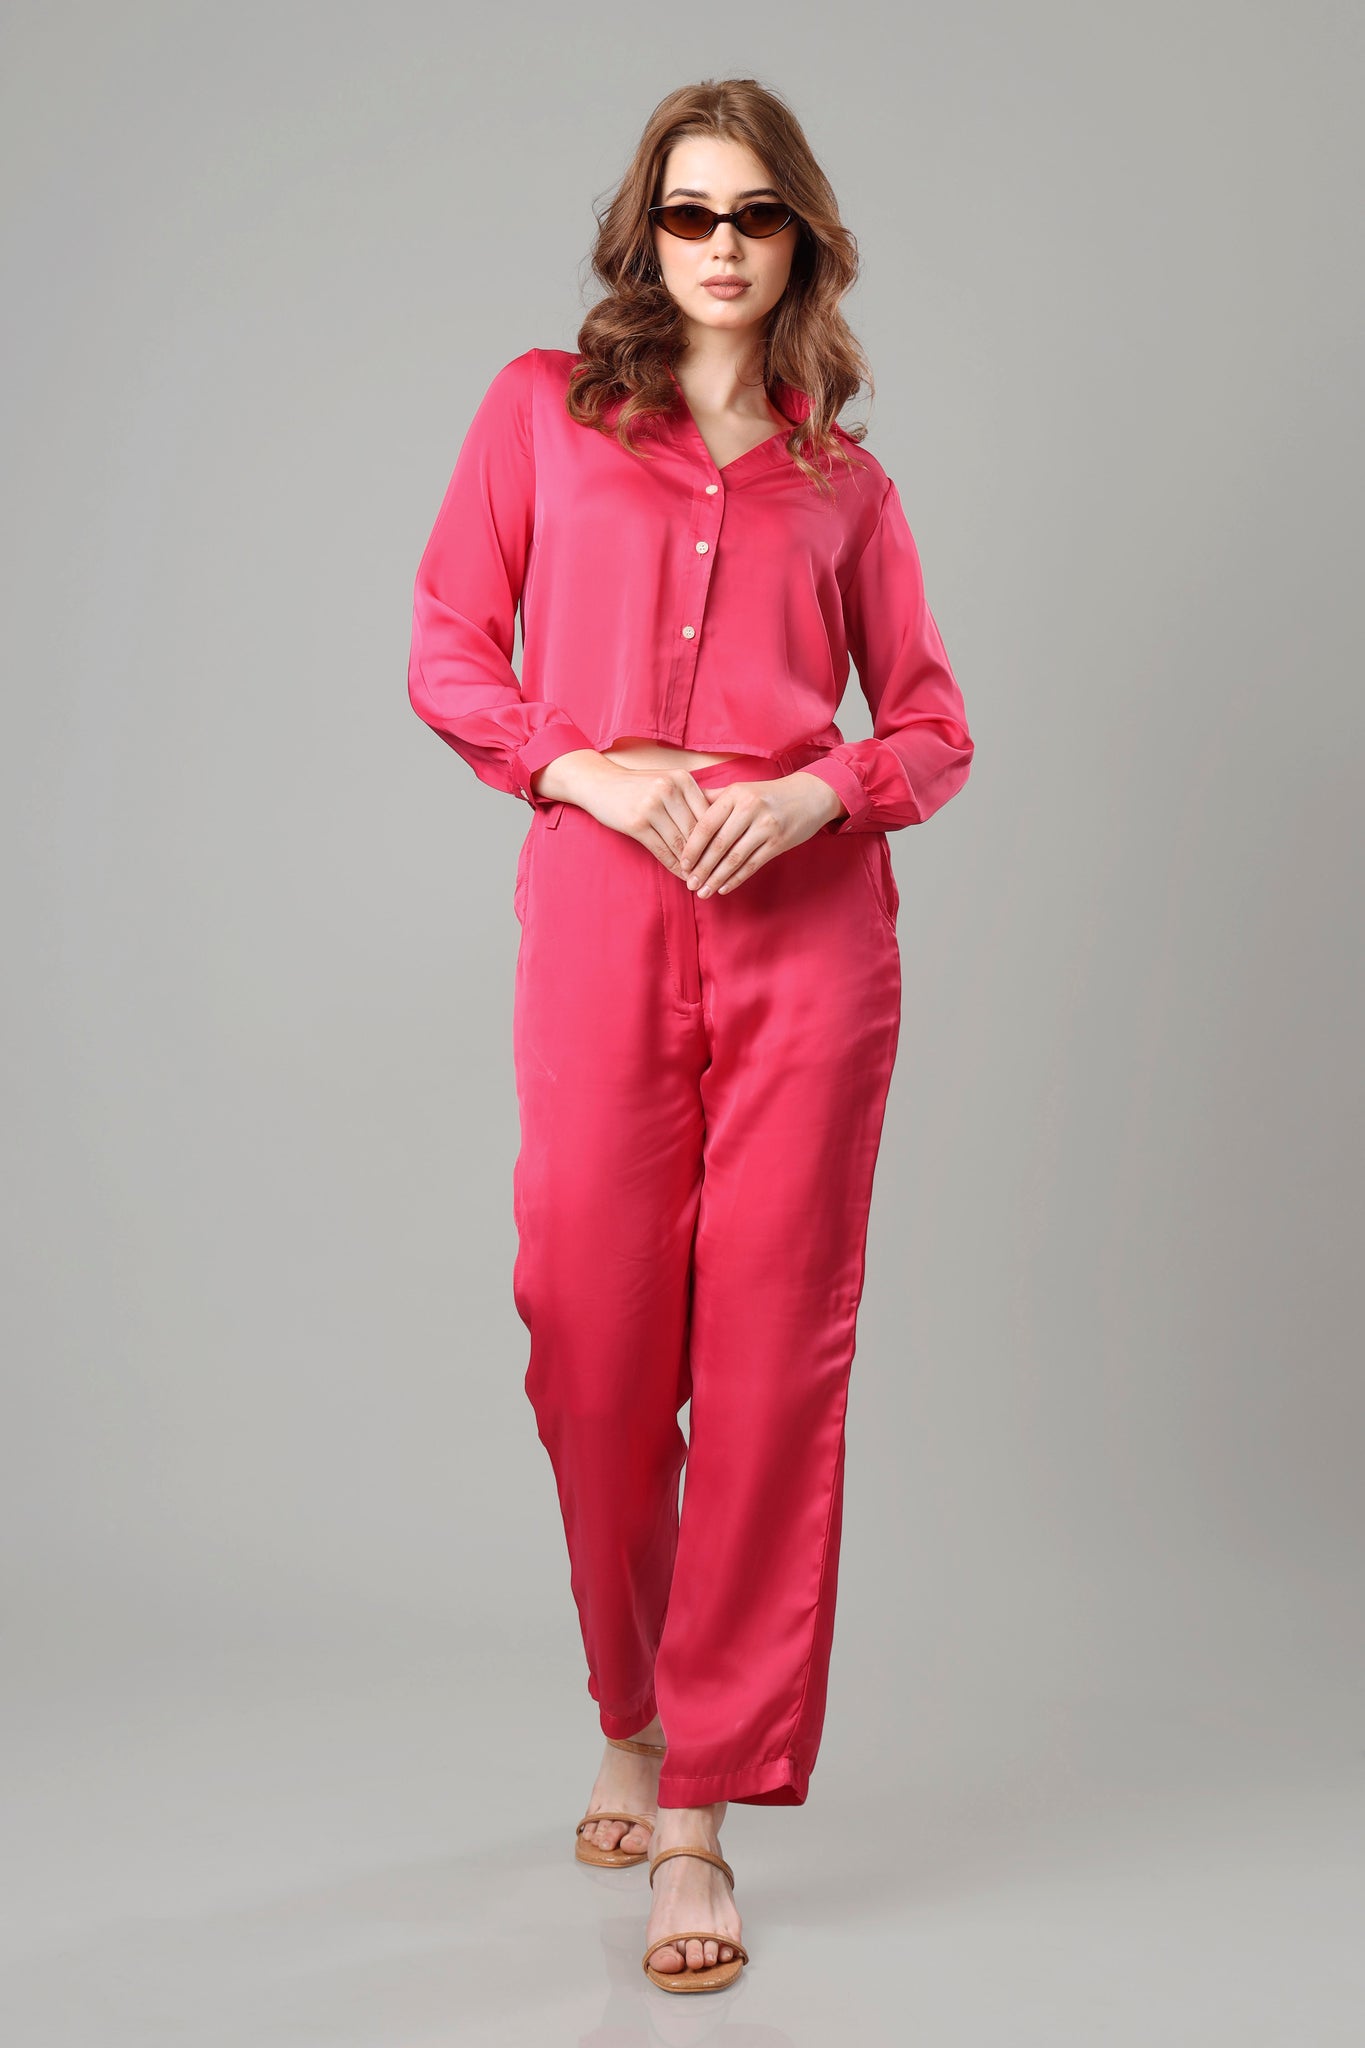 Hot Pink Copeed Shirt Co-Ord Set For Women